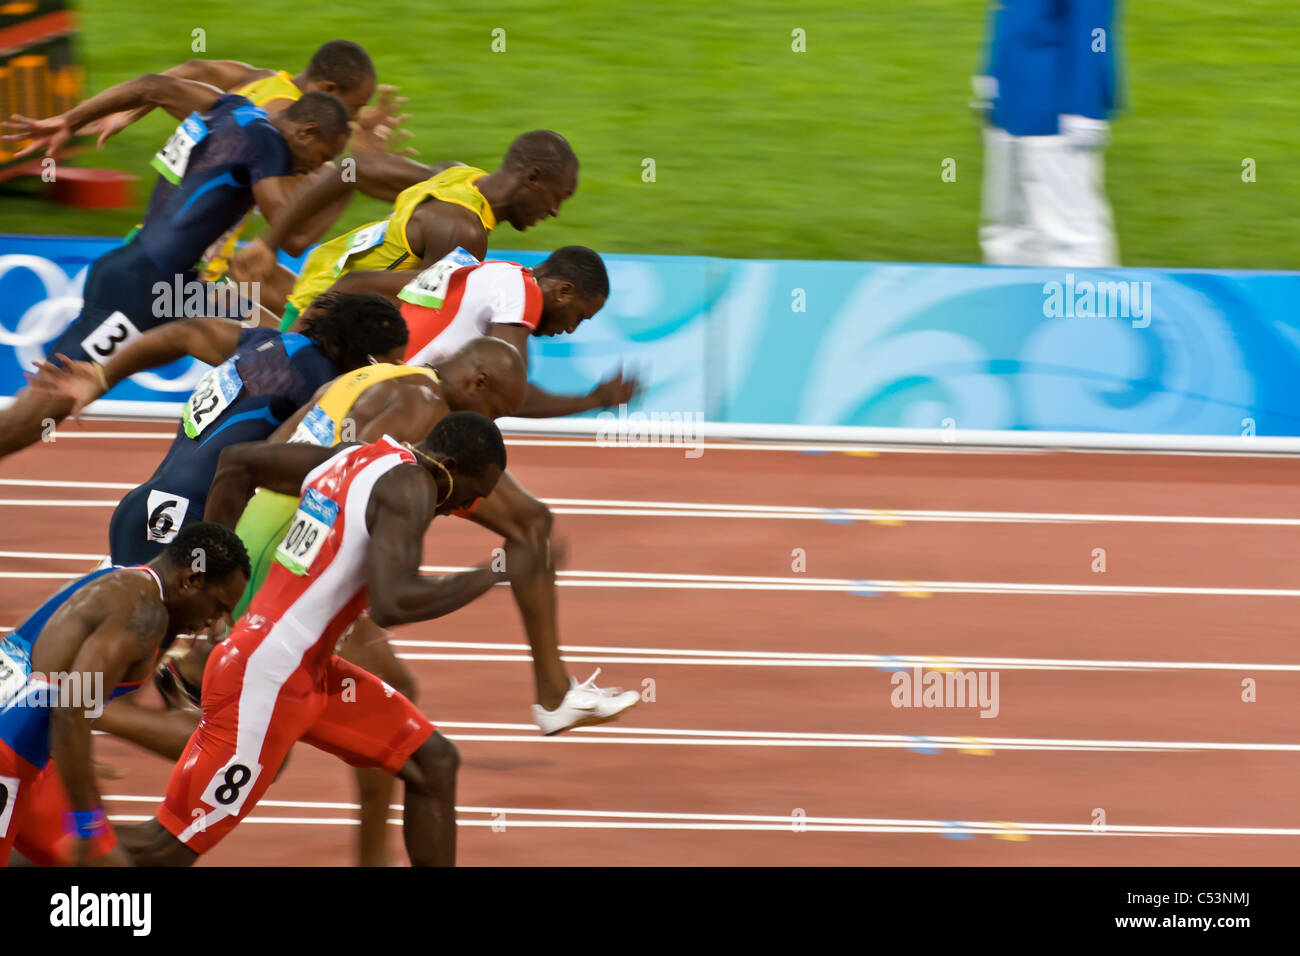 Beijing,  Aug 18: Start of Men's 100 meter sprint. Usain Bolt wins and sets a new world record at the 2008 Summer Olympic Games Stock Photo